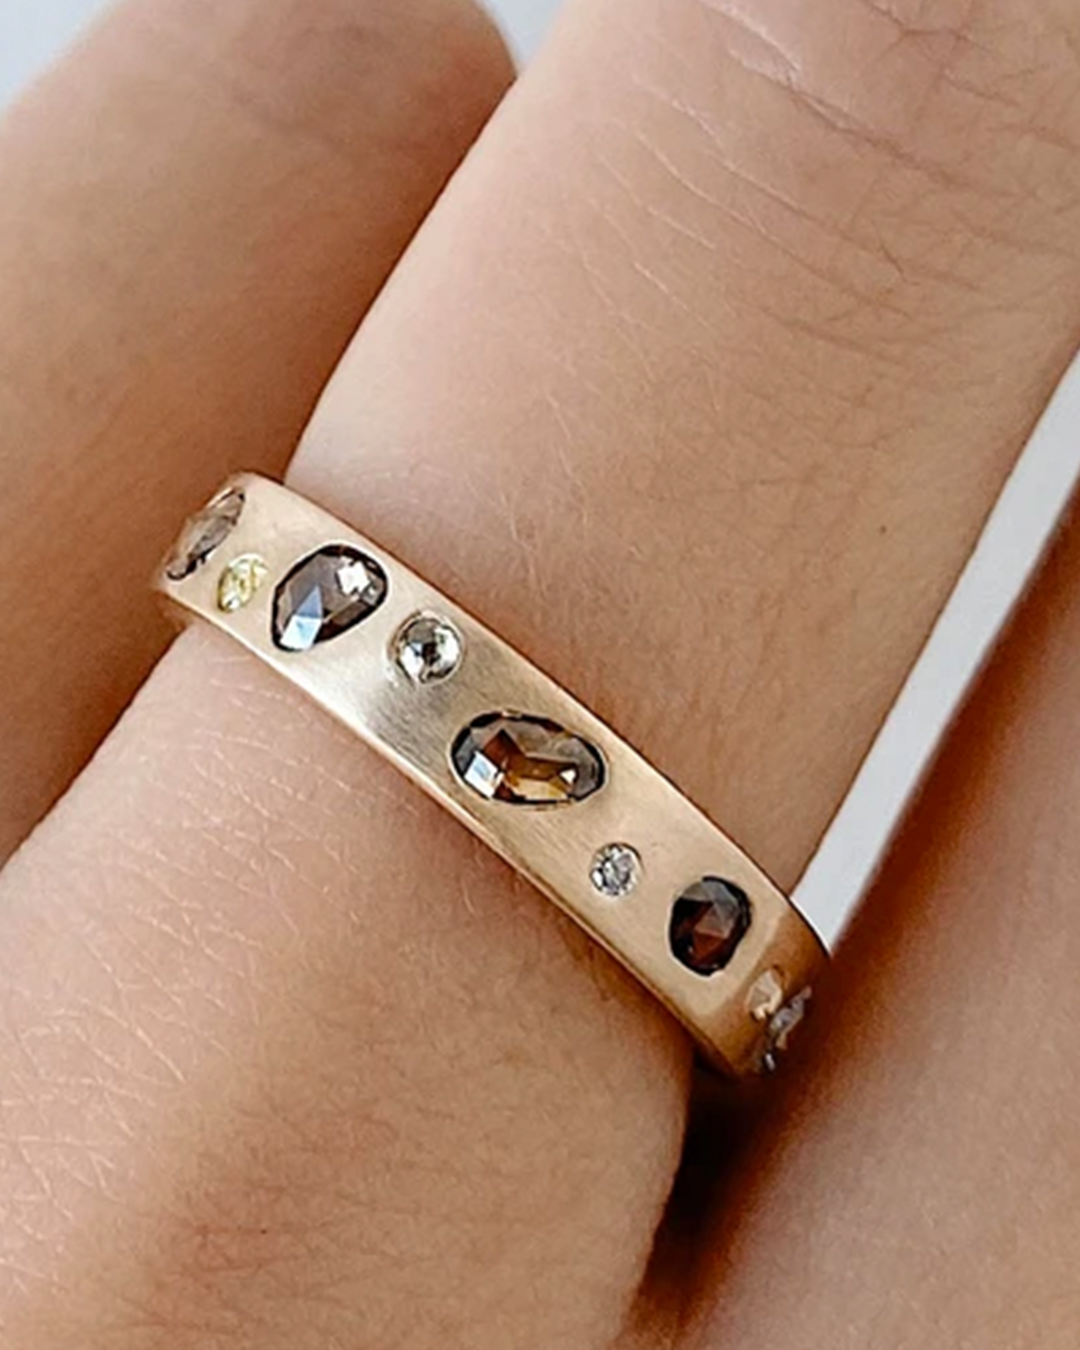 Leopard / Mixed Diamond Band By Casual Seance